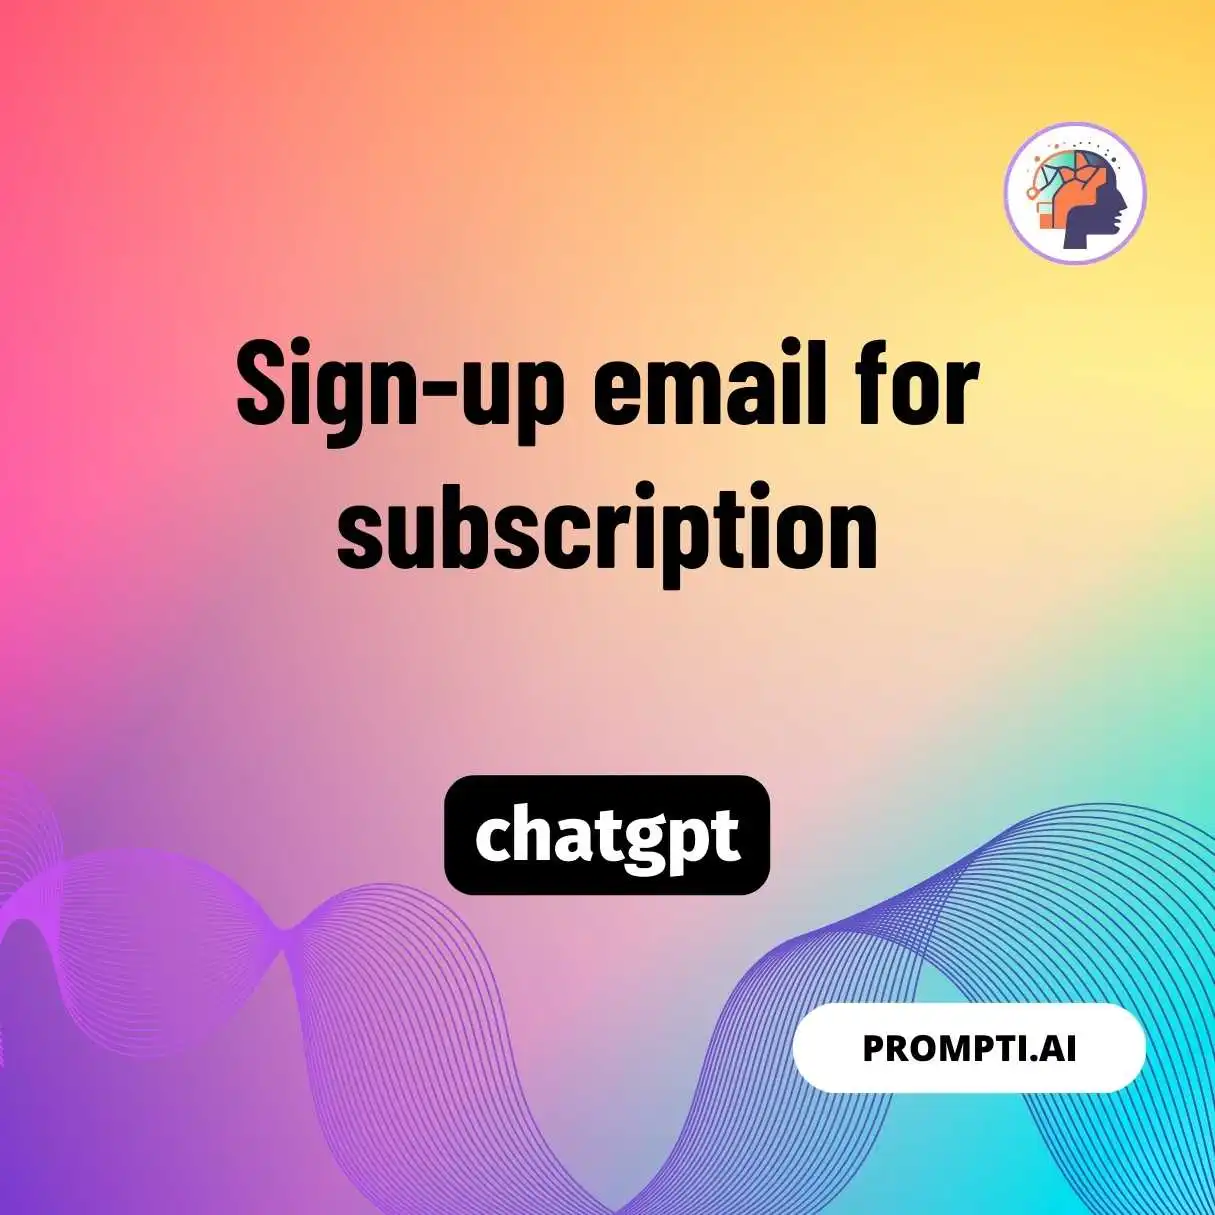 Sign-up email for subscription